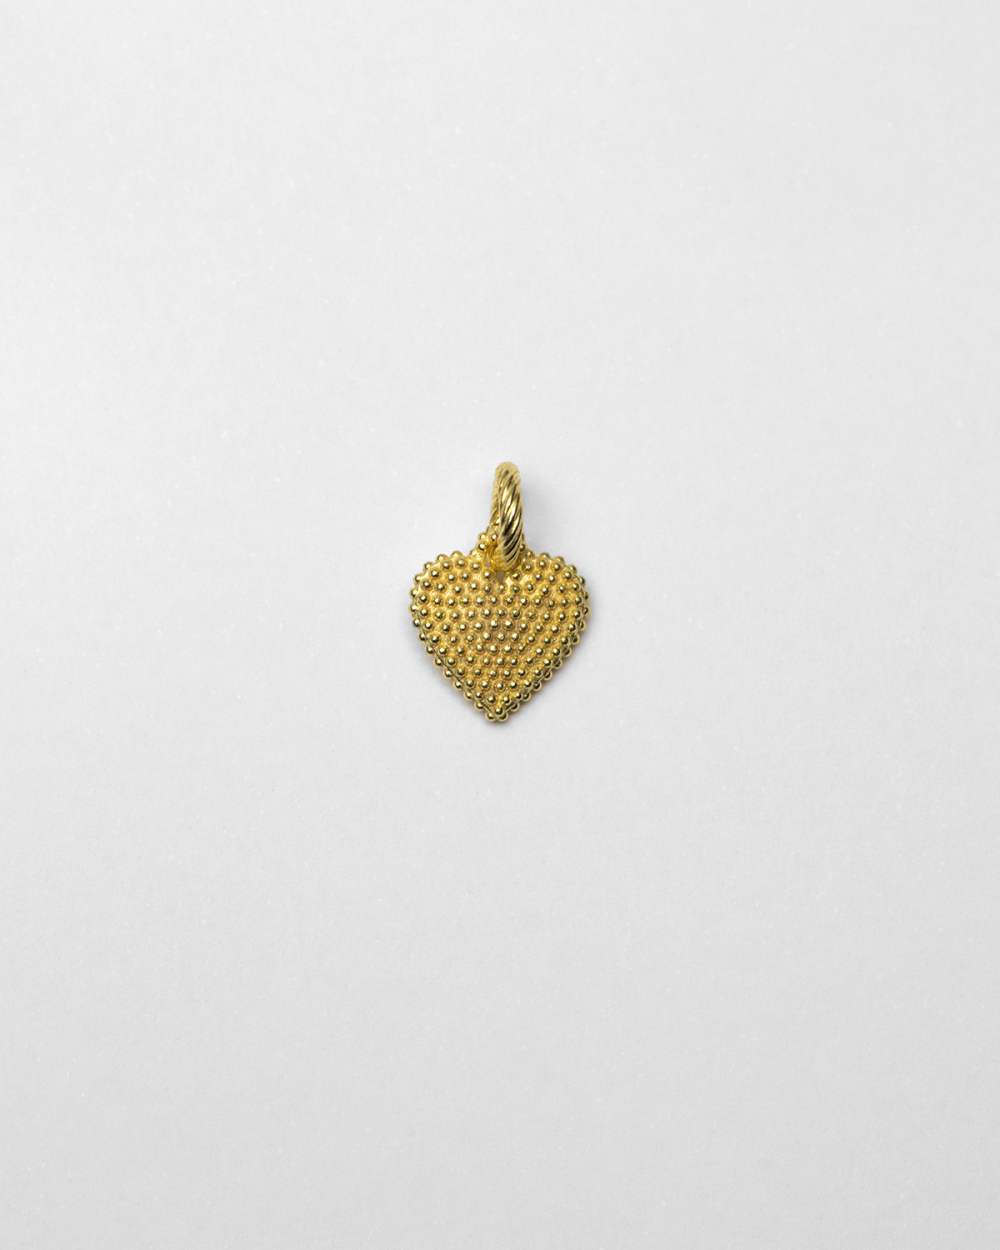 DOTTED HEART CHARM PENDANT / POLISHED YELLOW GOLD